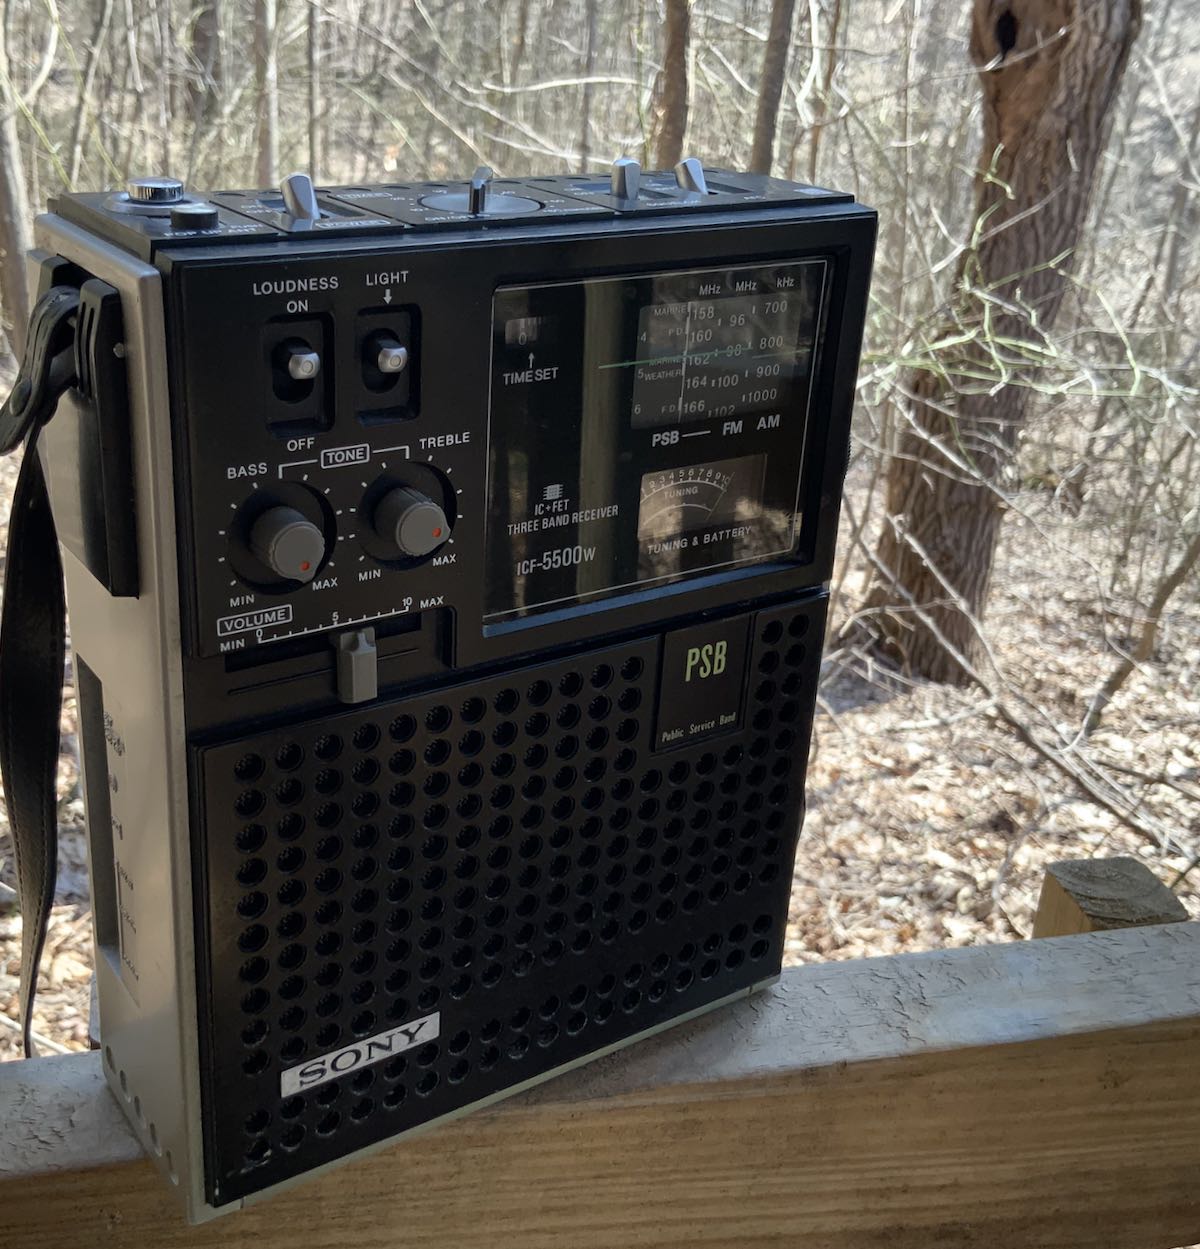 Sony ICF-5500W | The SWLing Post